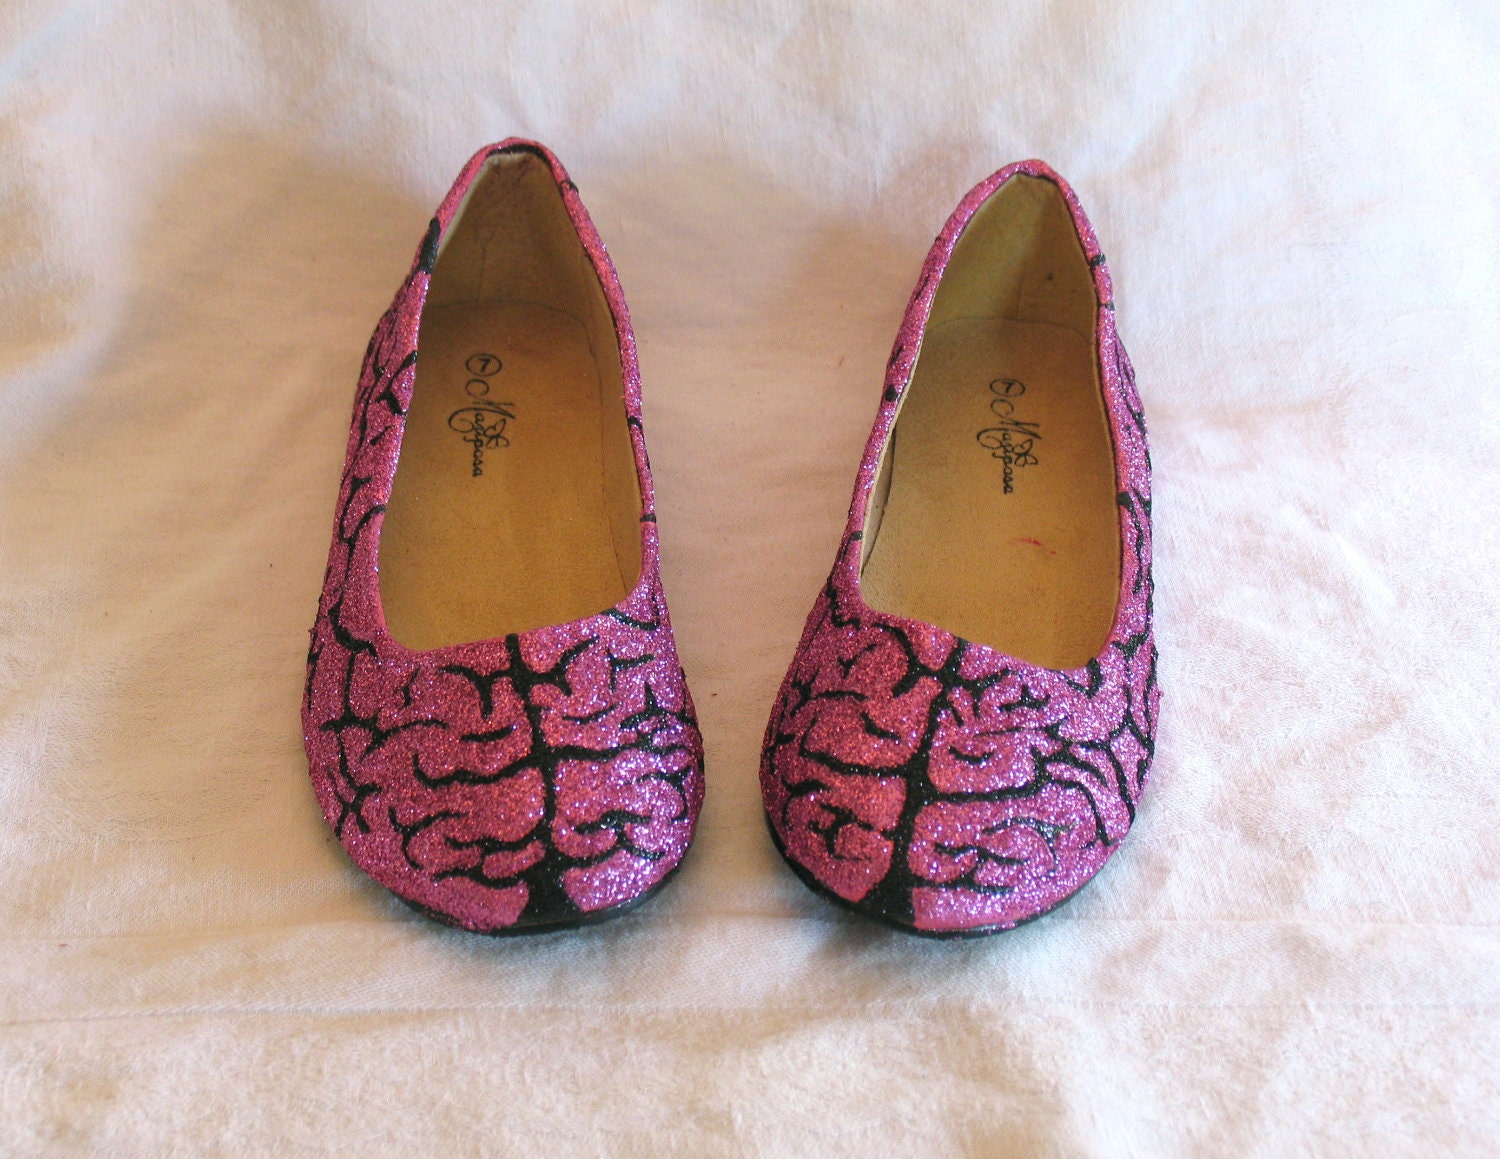 BRAINS - Zombie Inspired Glitter Shoes